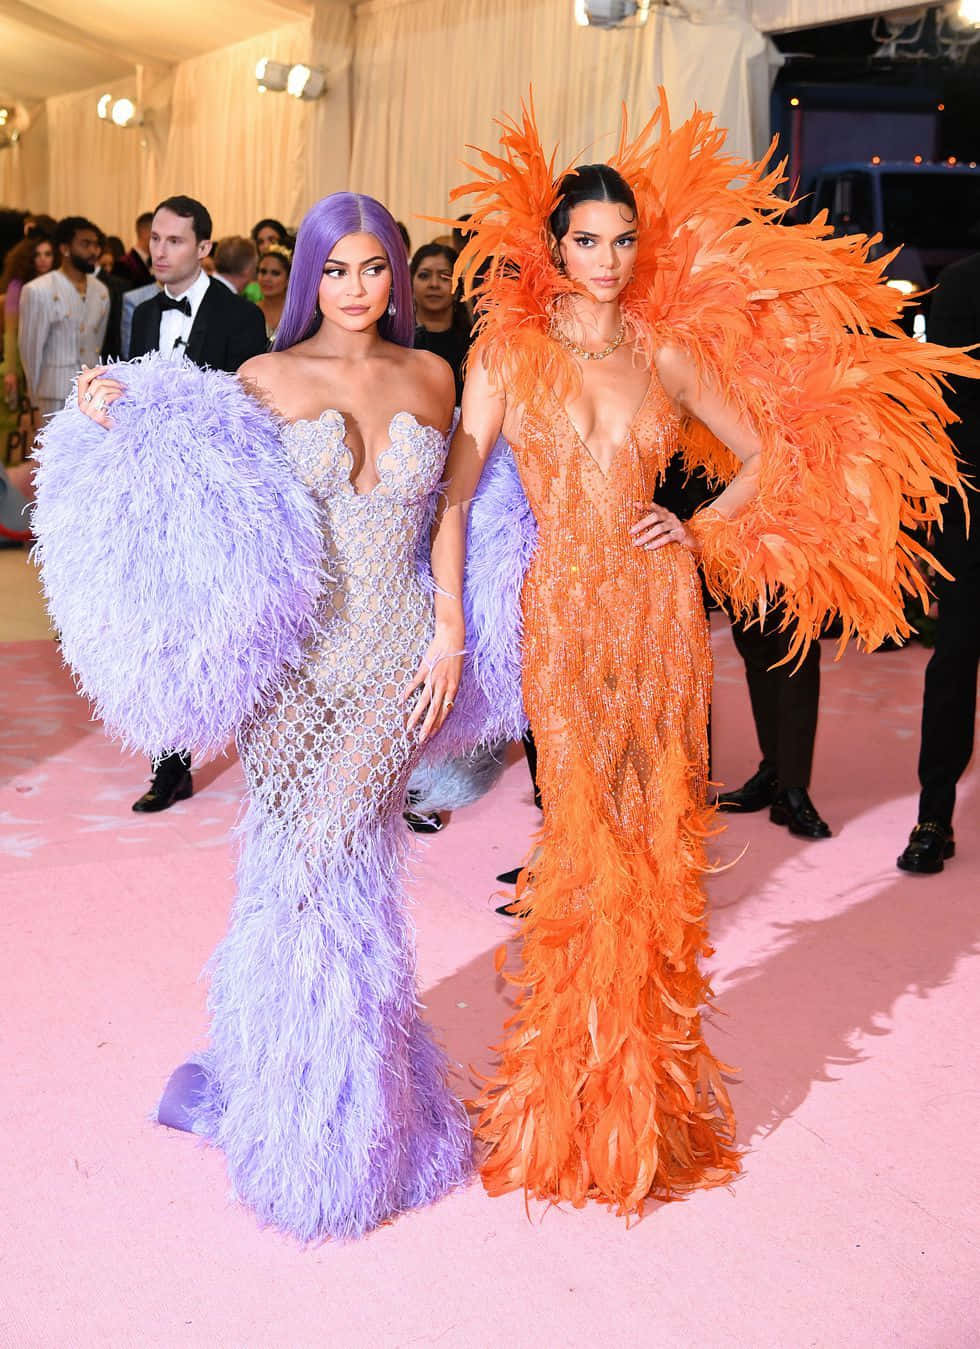 Met Gala 2022: Celebrities Dazzle in Extravagant Outfits on the Red Carpet